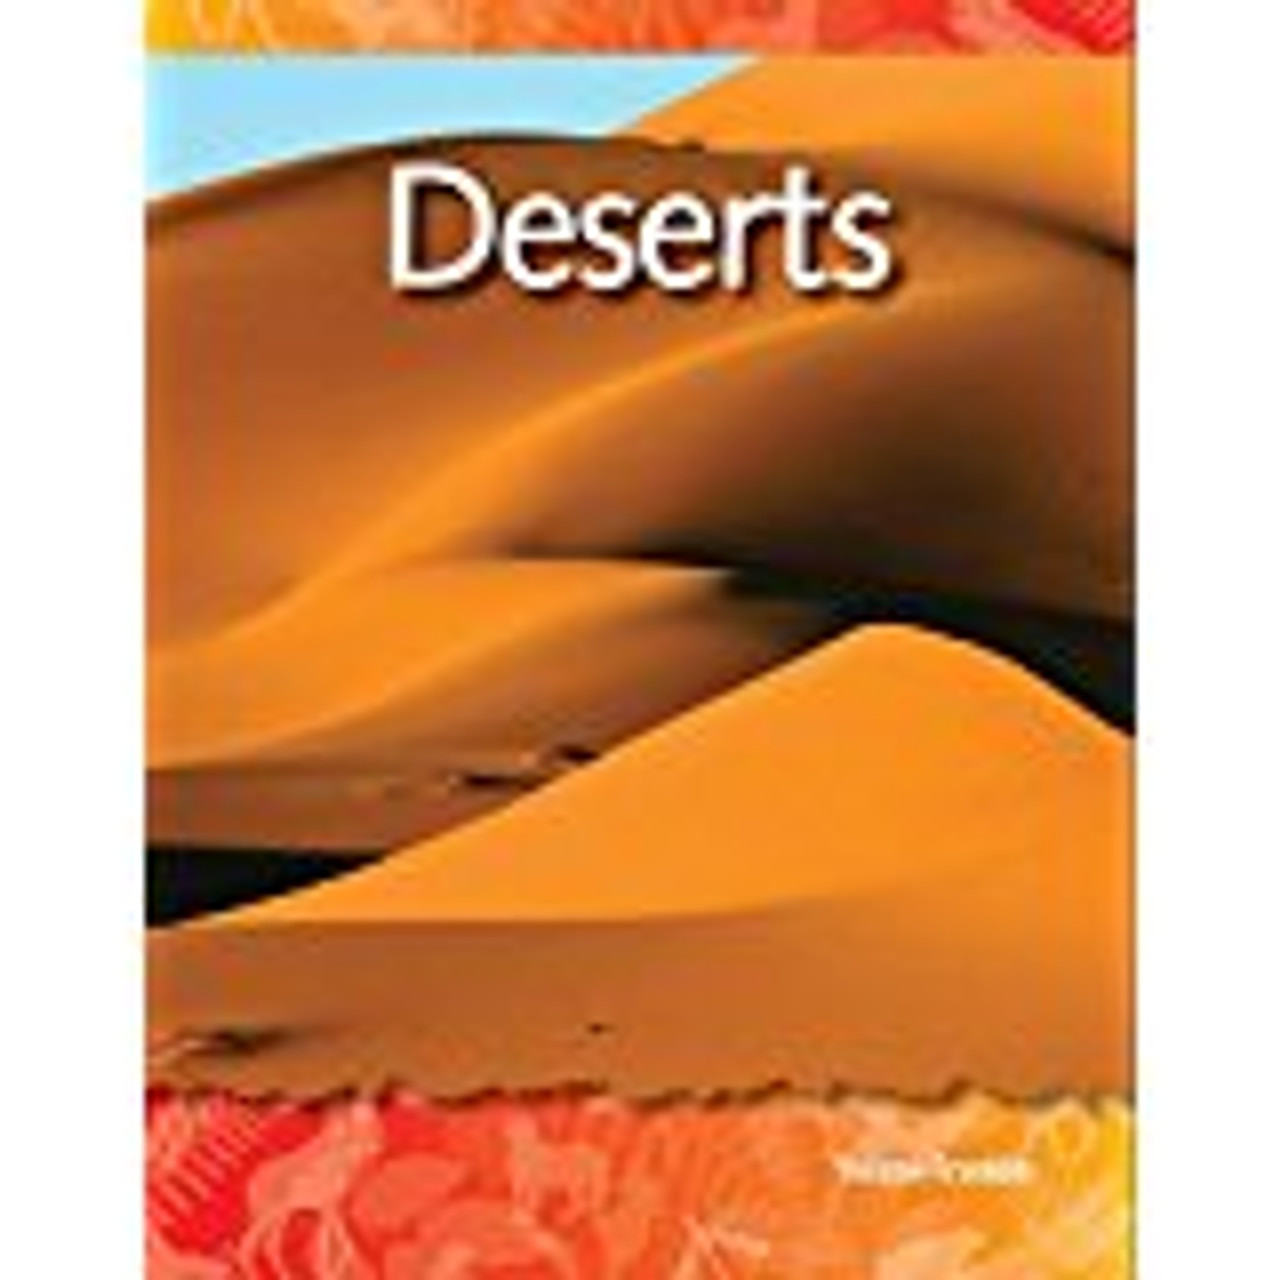 <p>Deserts may seem like harsh, uninhabitable places, but actually they support a diverse quantity of plant and animal life. And, they aren't always hot! Deserts serve an important role in Earth's existence, too. Readers learn about hot and cold deserts alike, as well as semiarid and coastal deserts. From the Horned Lizard to the Saguaro cactus rooted in rich soil, the desert biome will amaze readers</p>